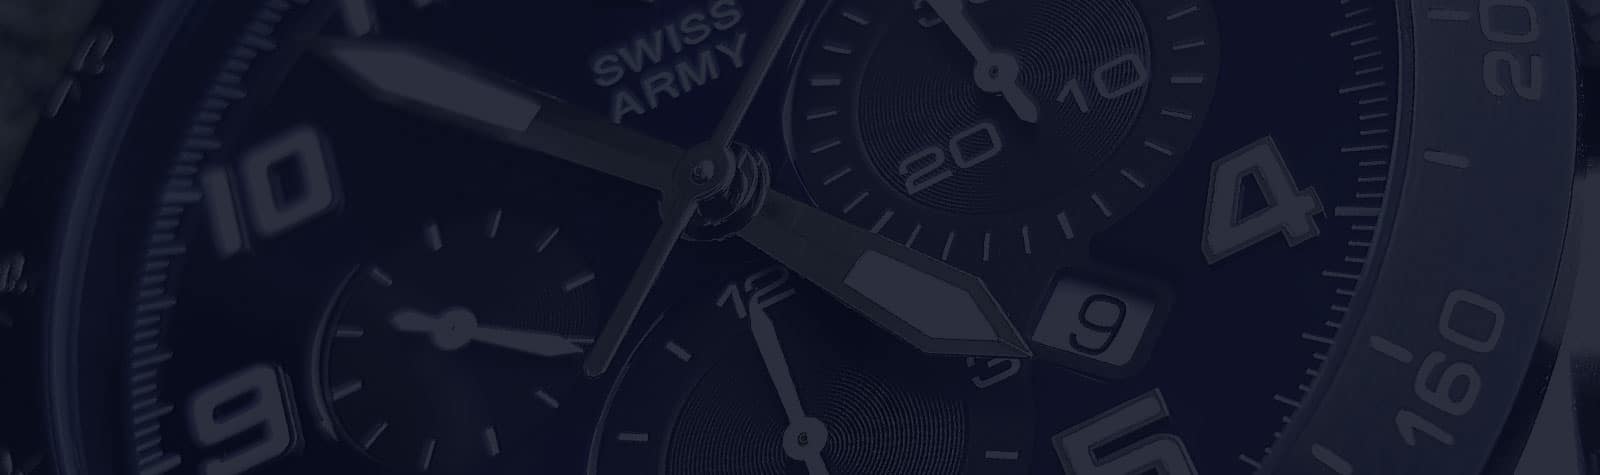 MEET THE WATCH: Victorinox Swiss Army Airboss Mach 6 Limited Edition